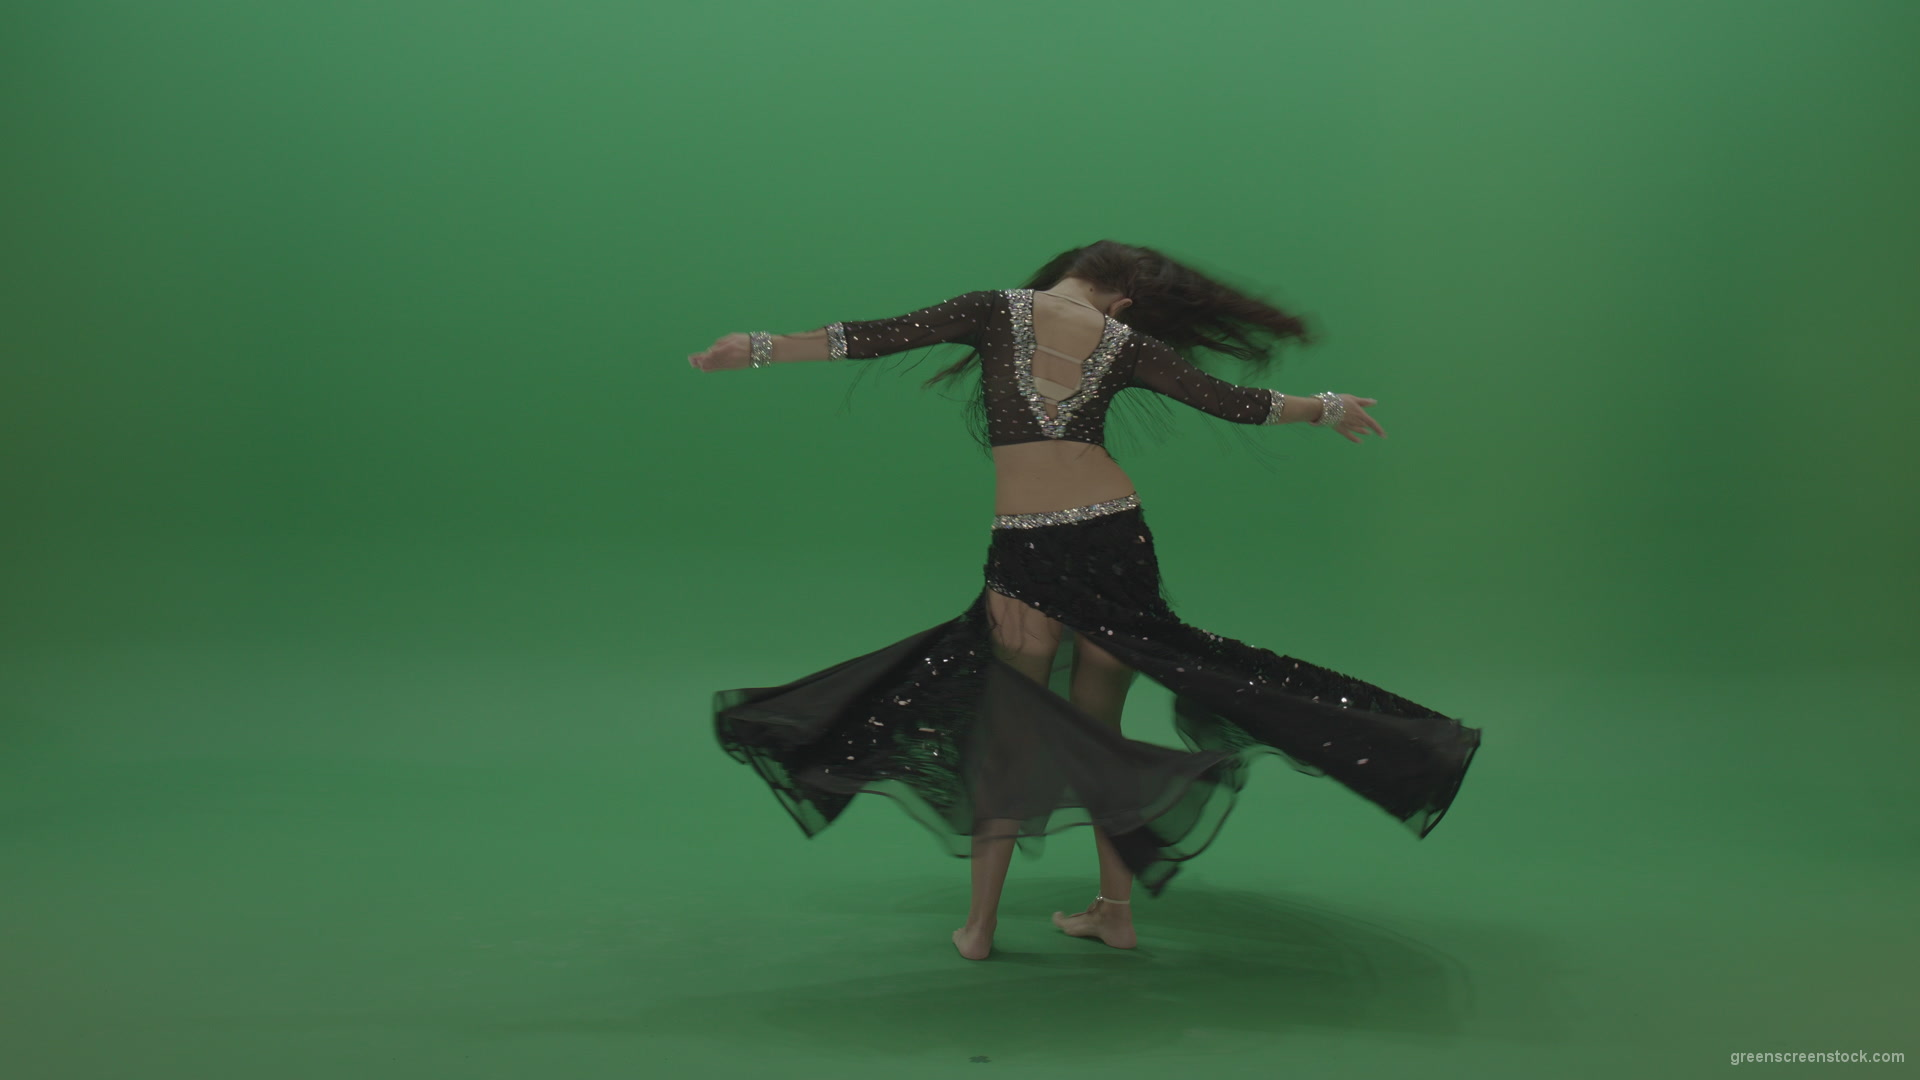 Appealing-belly-dancer-in-black-wear-display-amazing-dance-moves-over-chromakey-background_006 Green Screen Stock